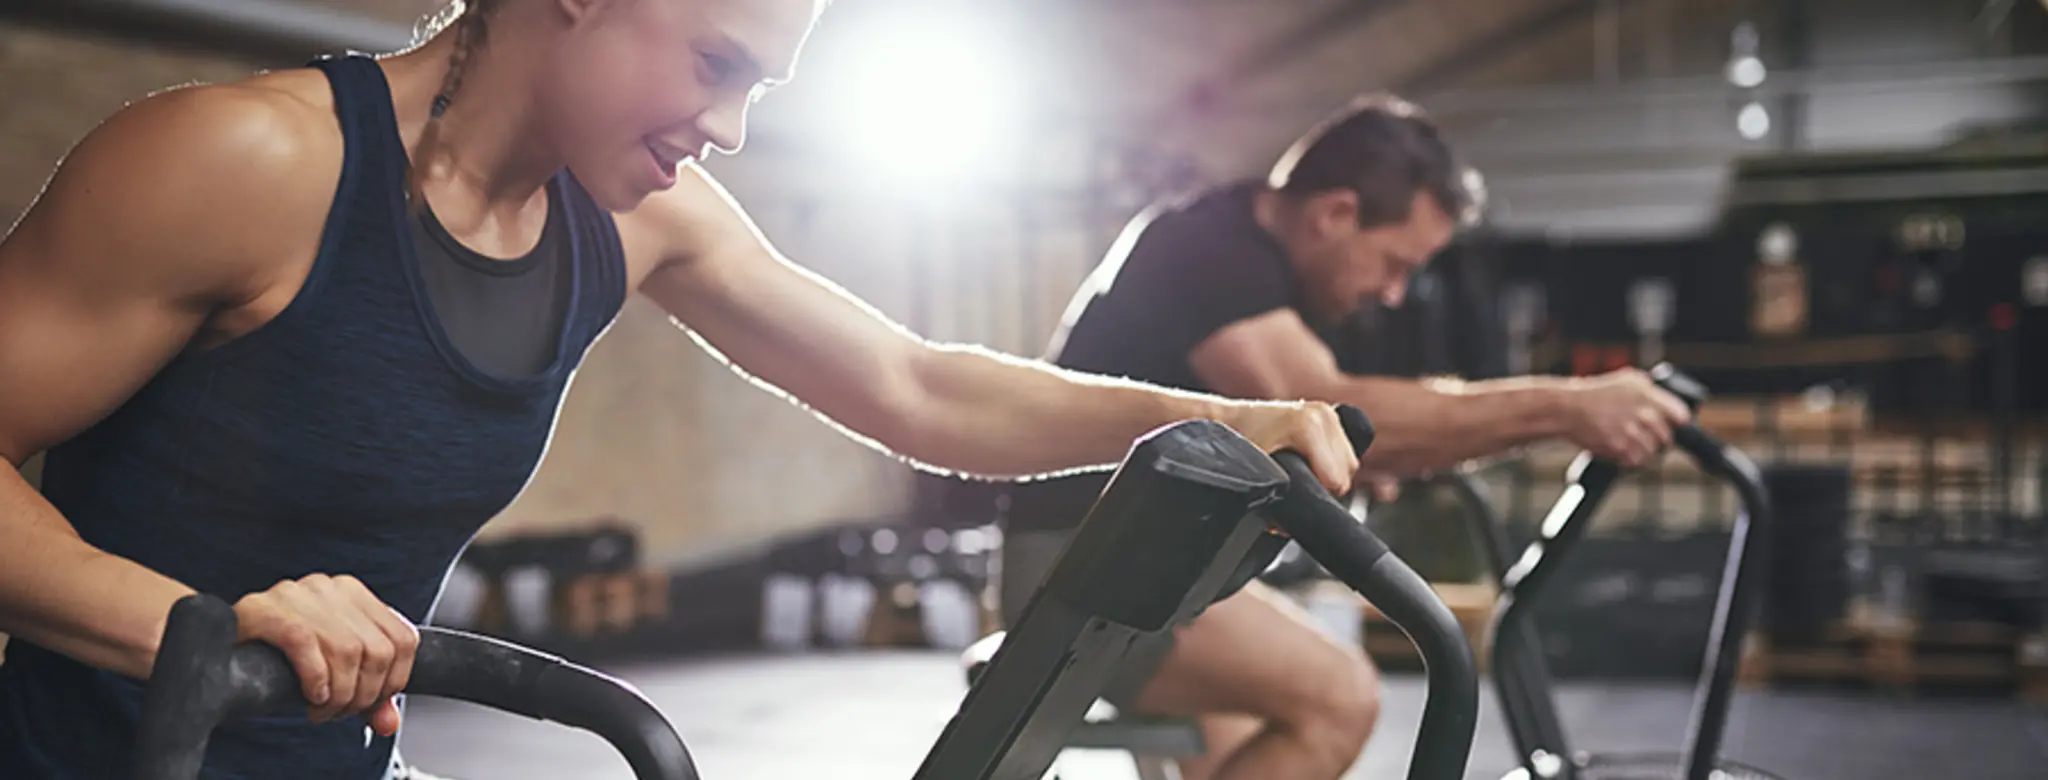 Woman working hard on stationary bike, man biking in background after purchasing introductory offers